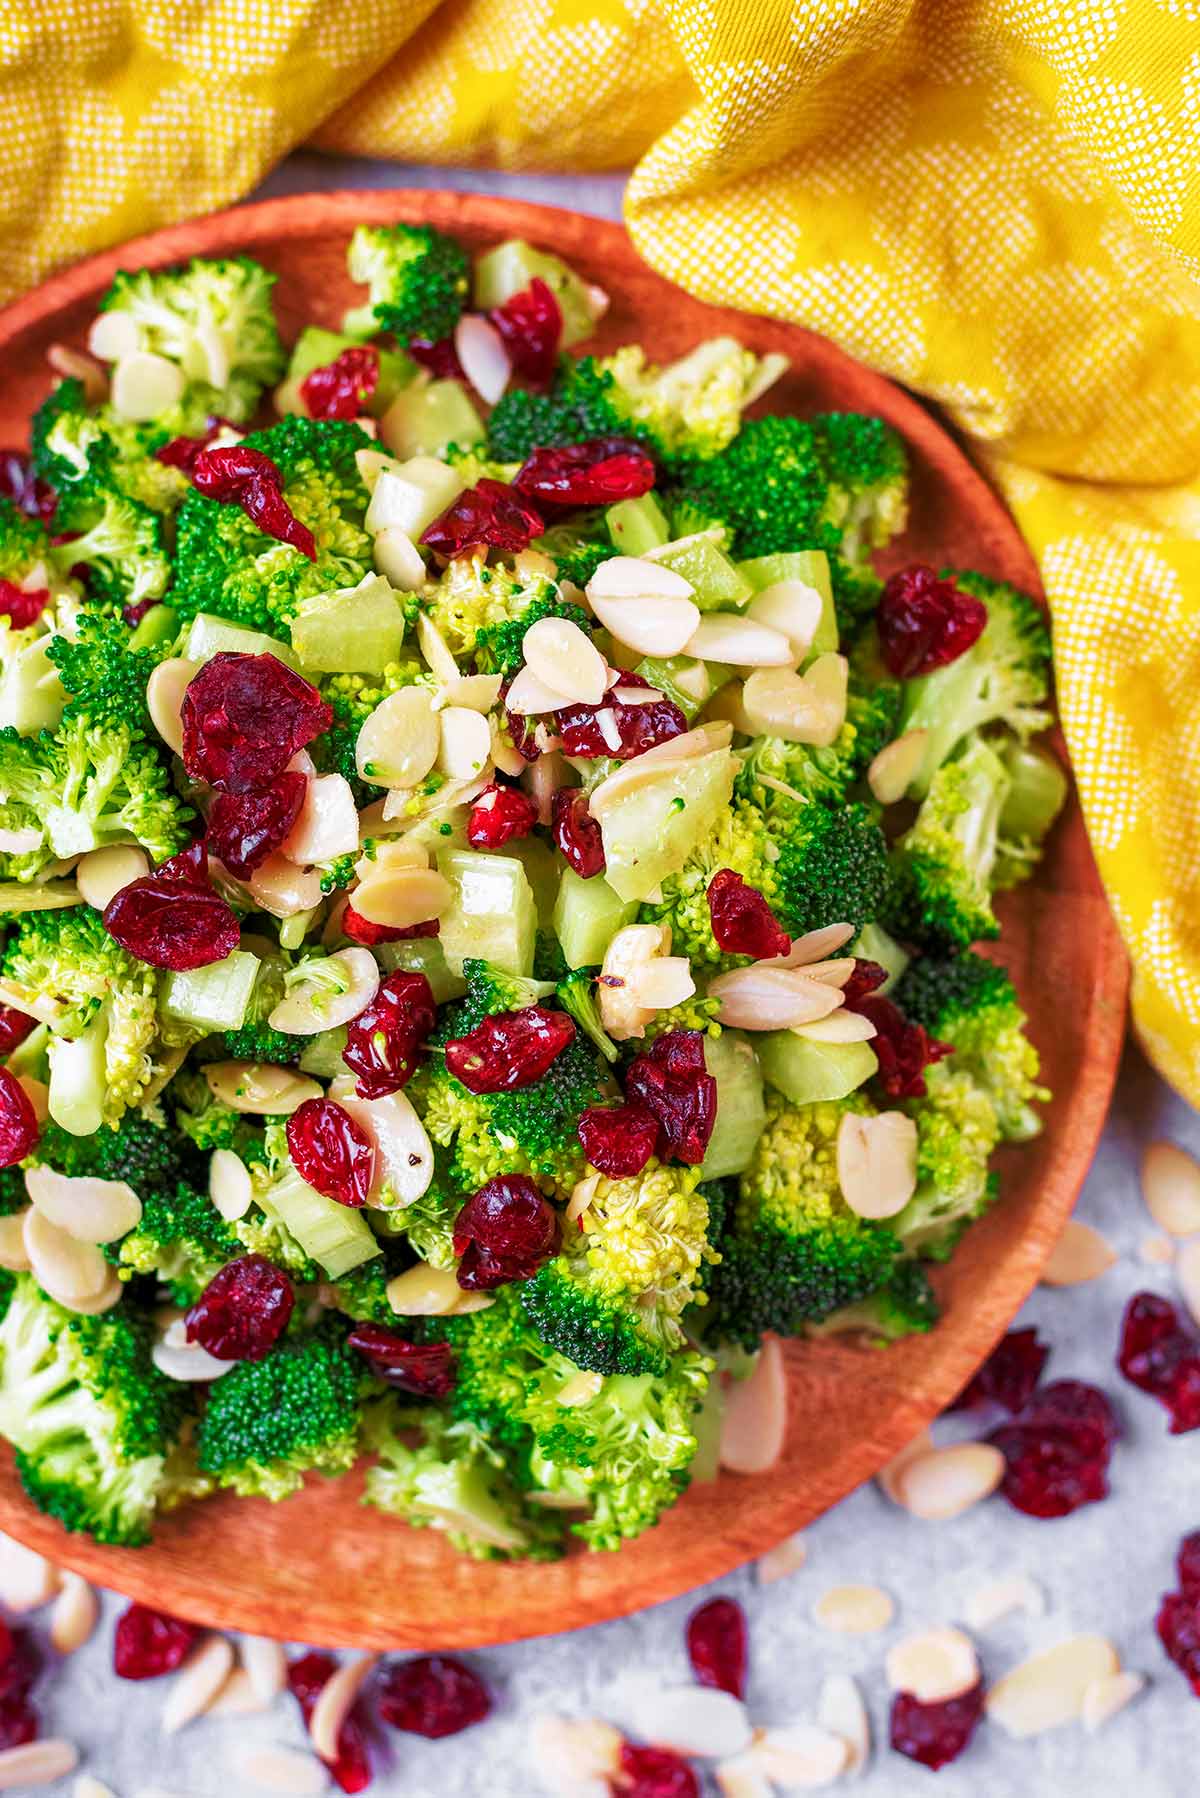 A salad of raw broccoli, cranberries and almonds on a wooden plate.